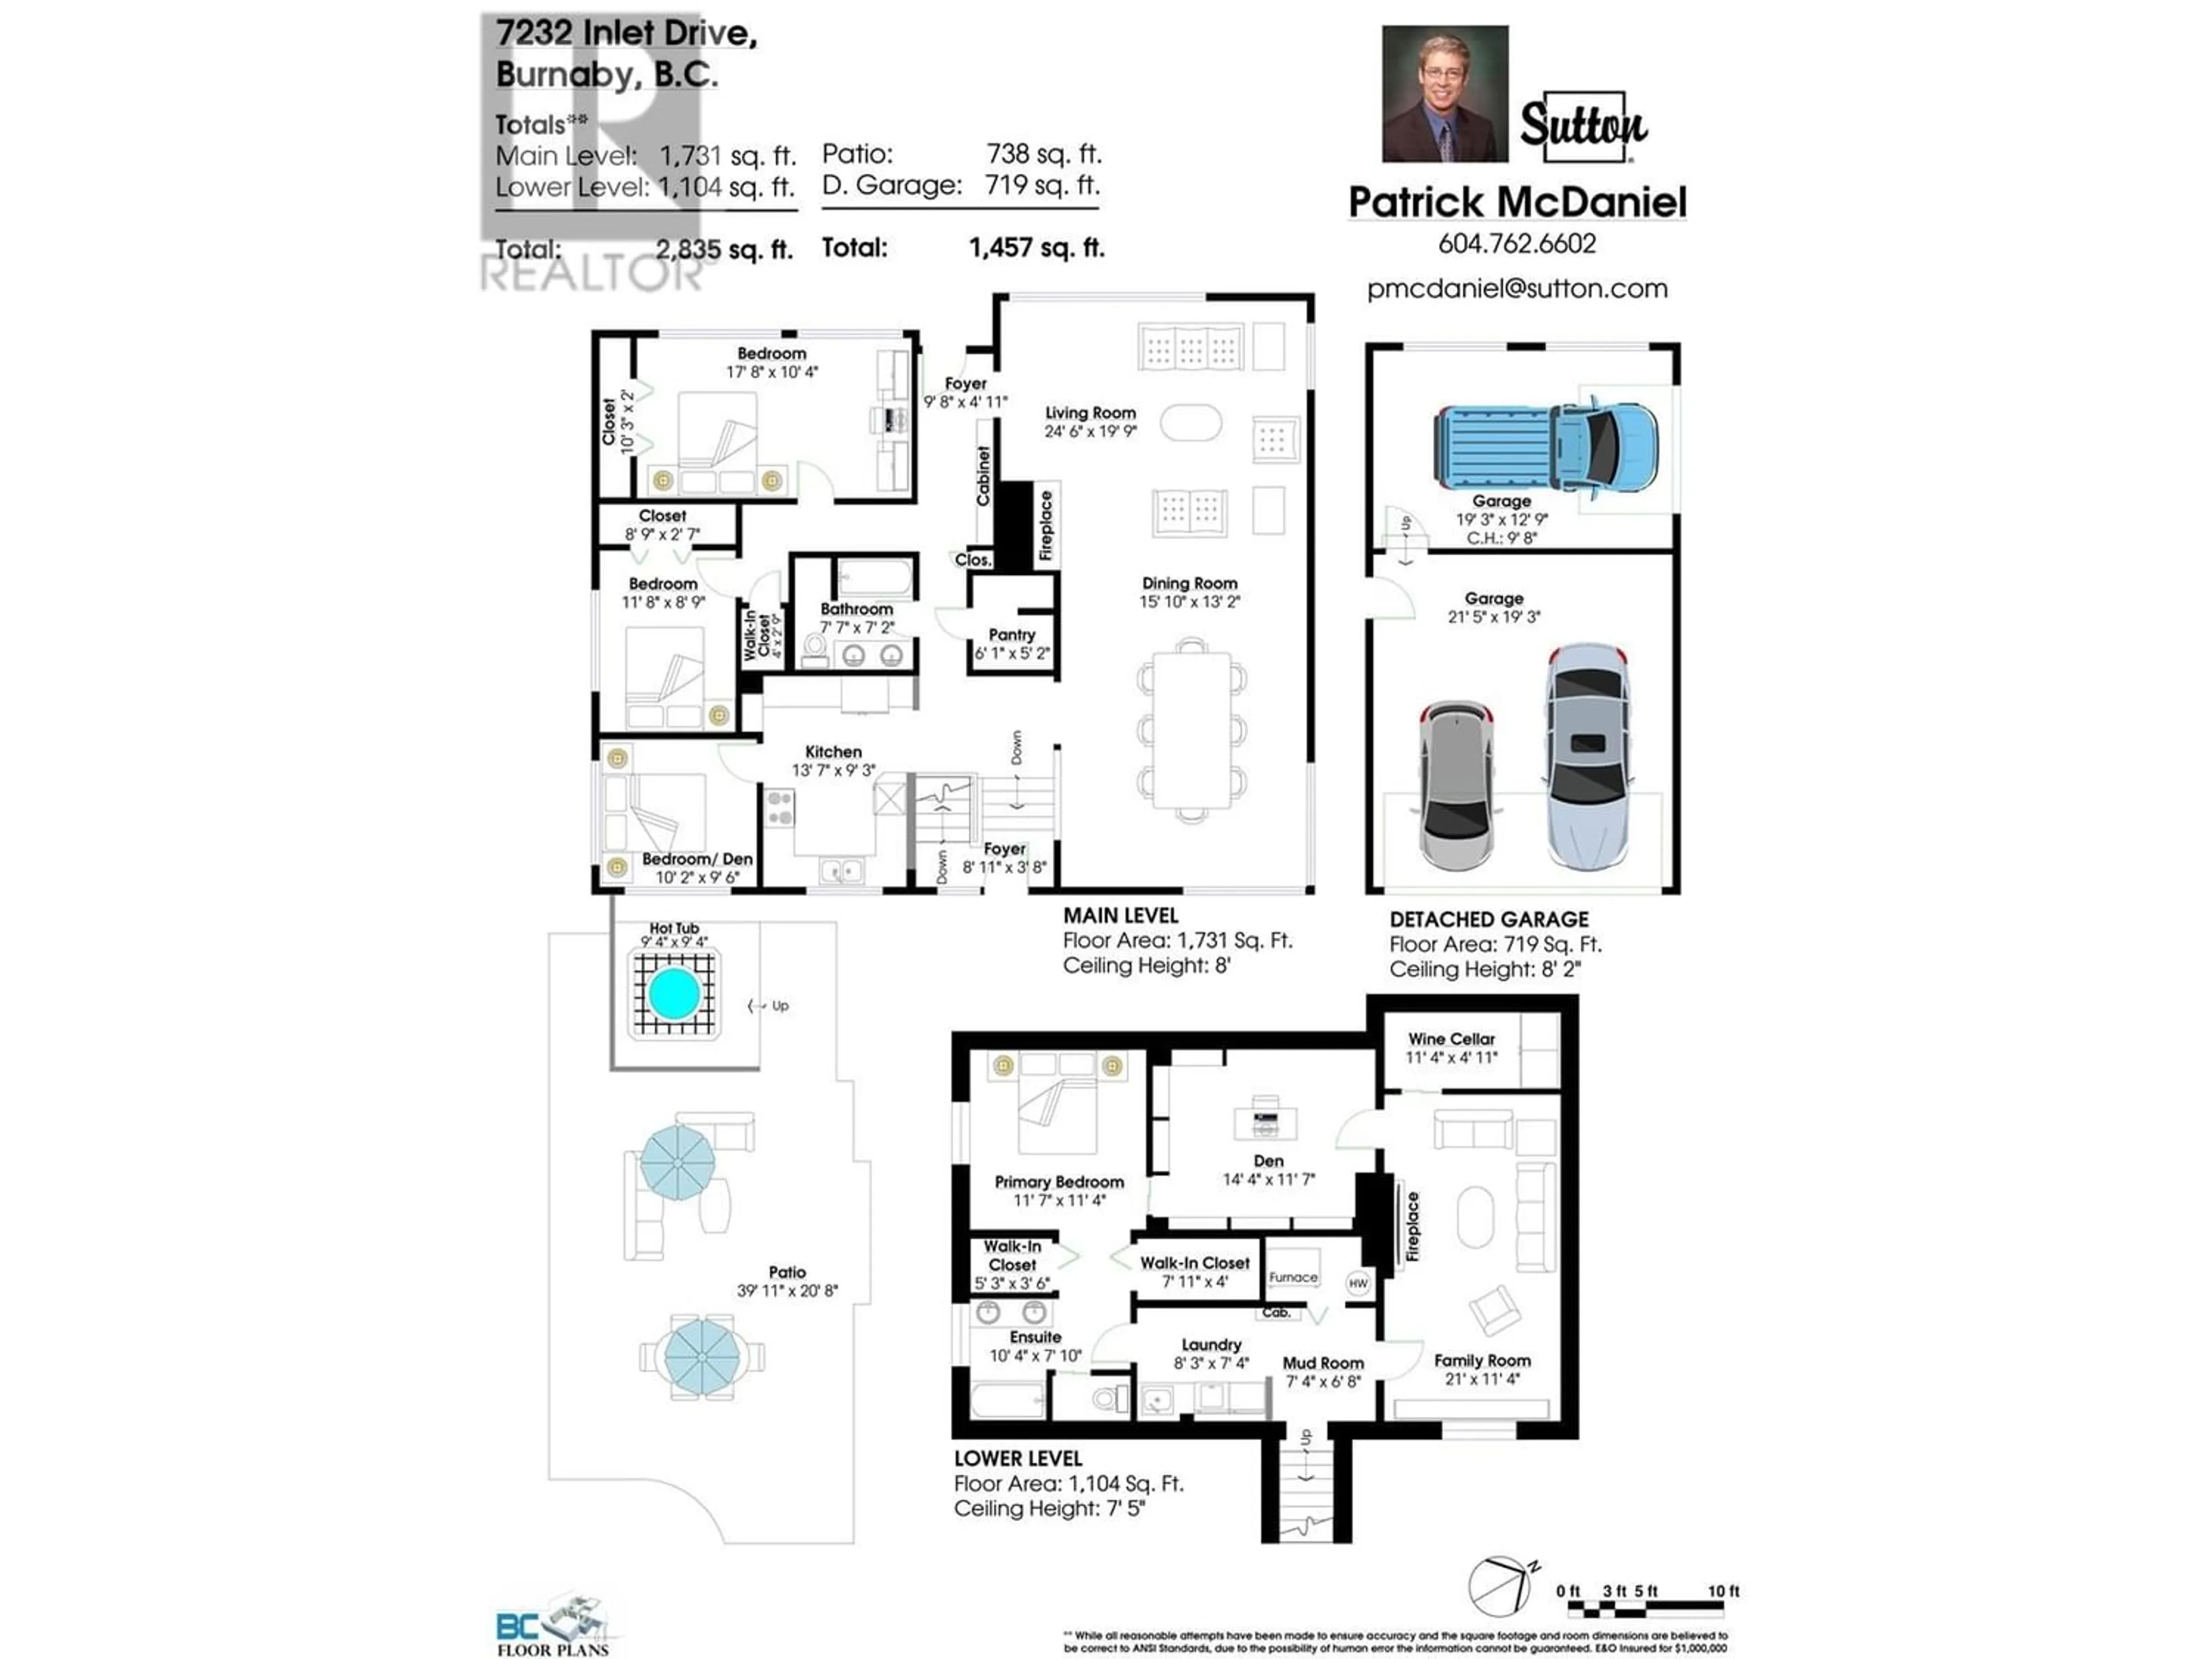 Floor plan for 7232 INLET DRIVE, Burnaby British Columbia V3A1C4